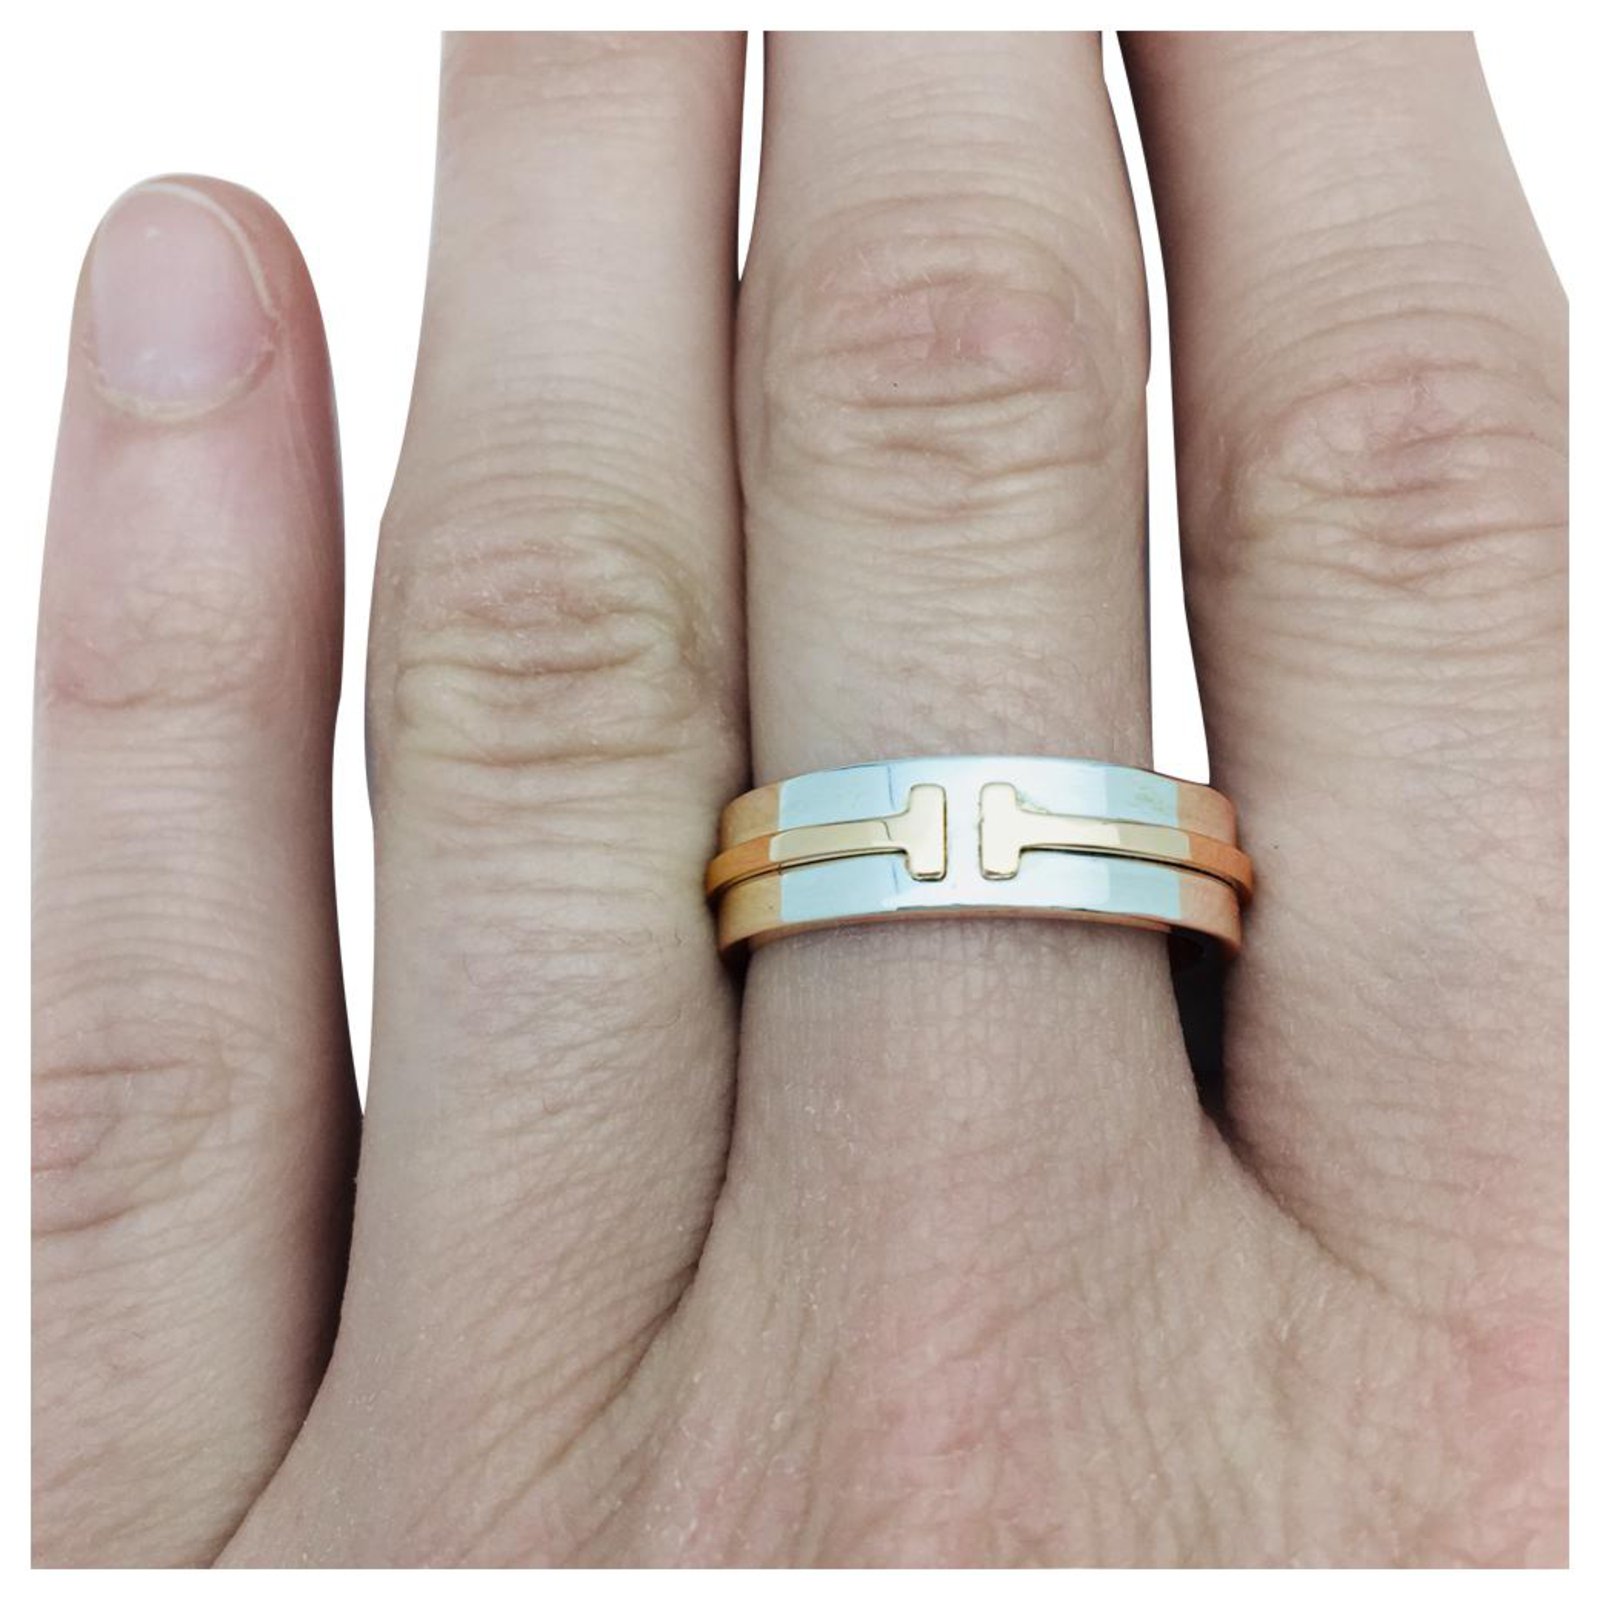 Designer V Gold Tiffany Double Ring Company With 18k Plated Diamonds  Minimalist, Versatile, And Light Luxury For Women From Qqwjzy, $109.75 |  DHgate.Com